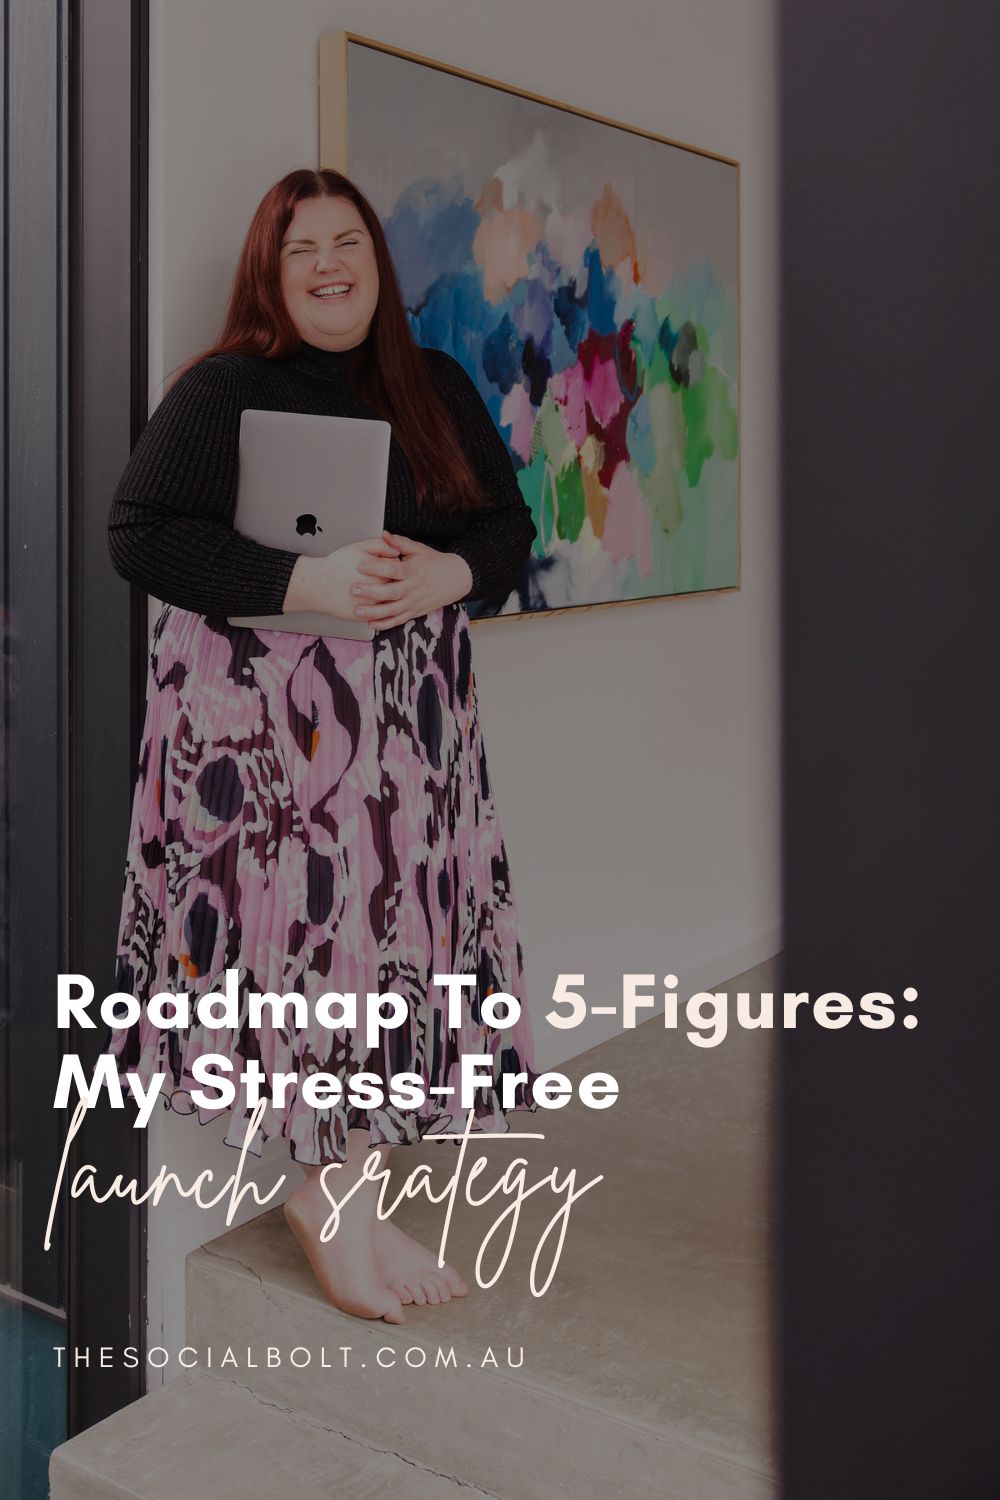 Roadmap to 5-Figures: My Stress-Free Launch Strategy